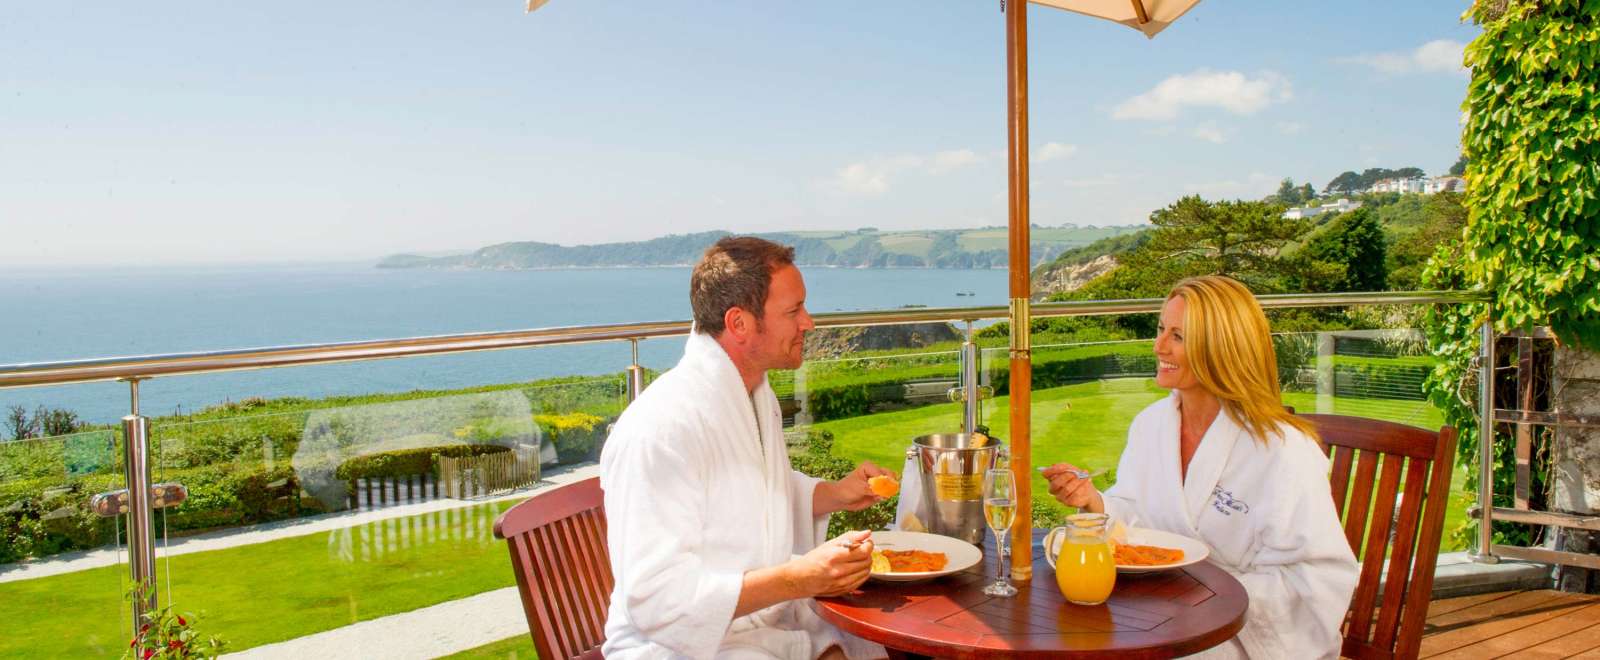 Carlyon Bay Hotel Couple Eating Breakfast and Enjoying the View from Their Balcony